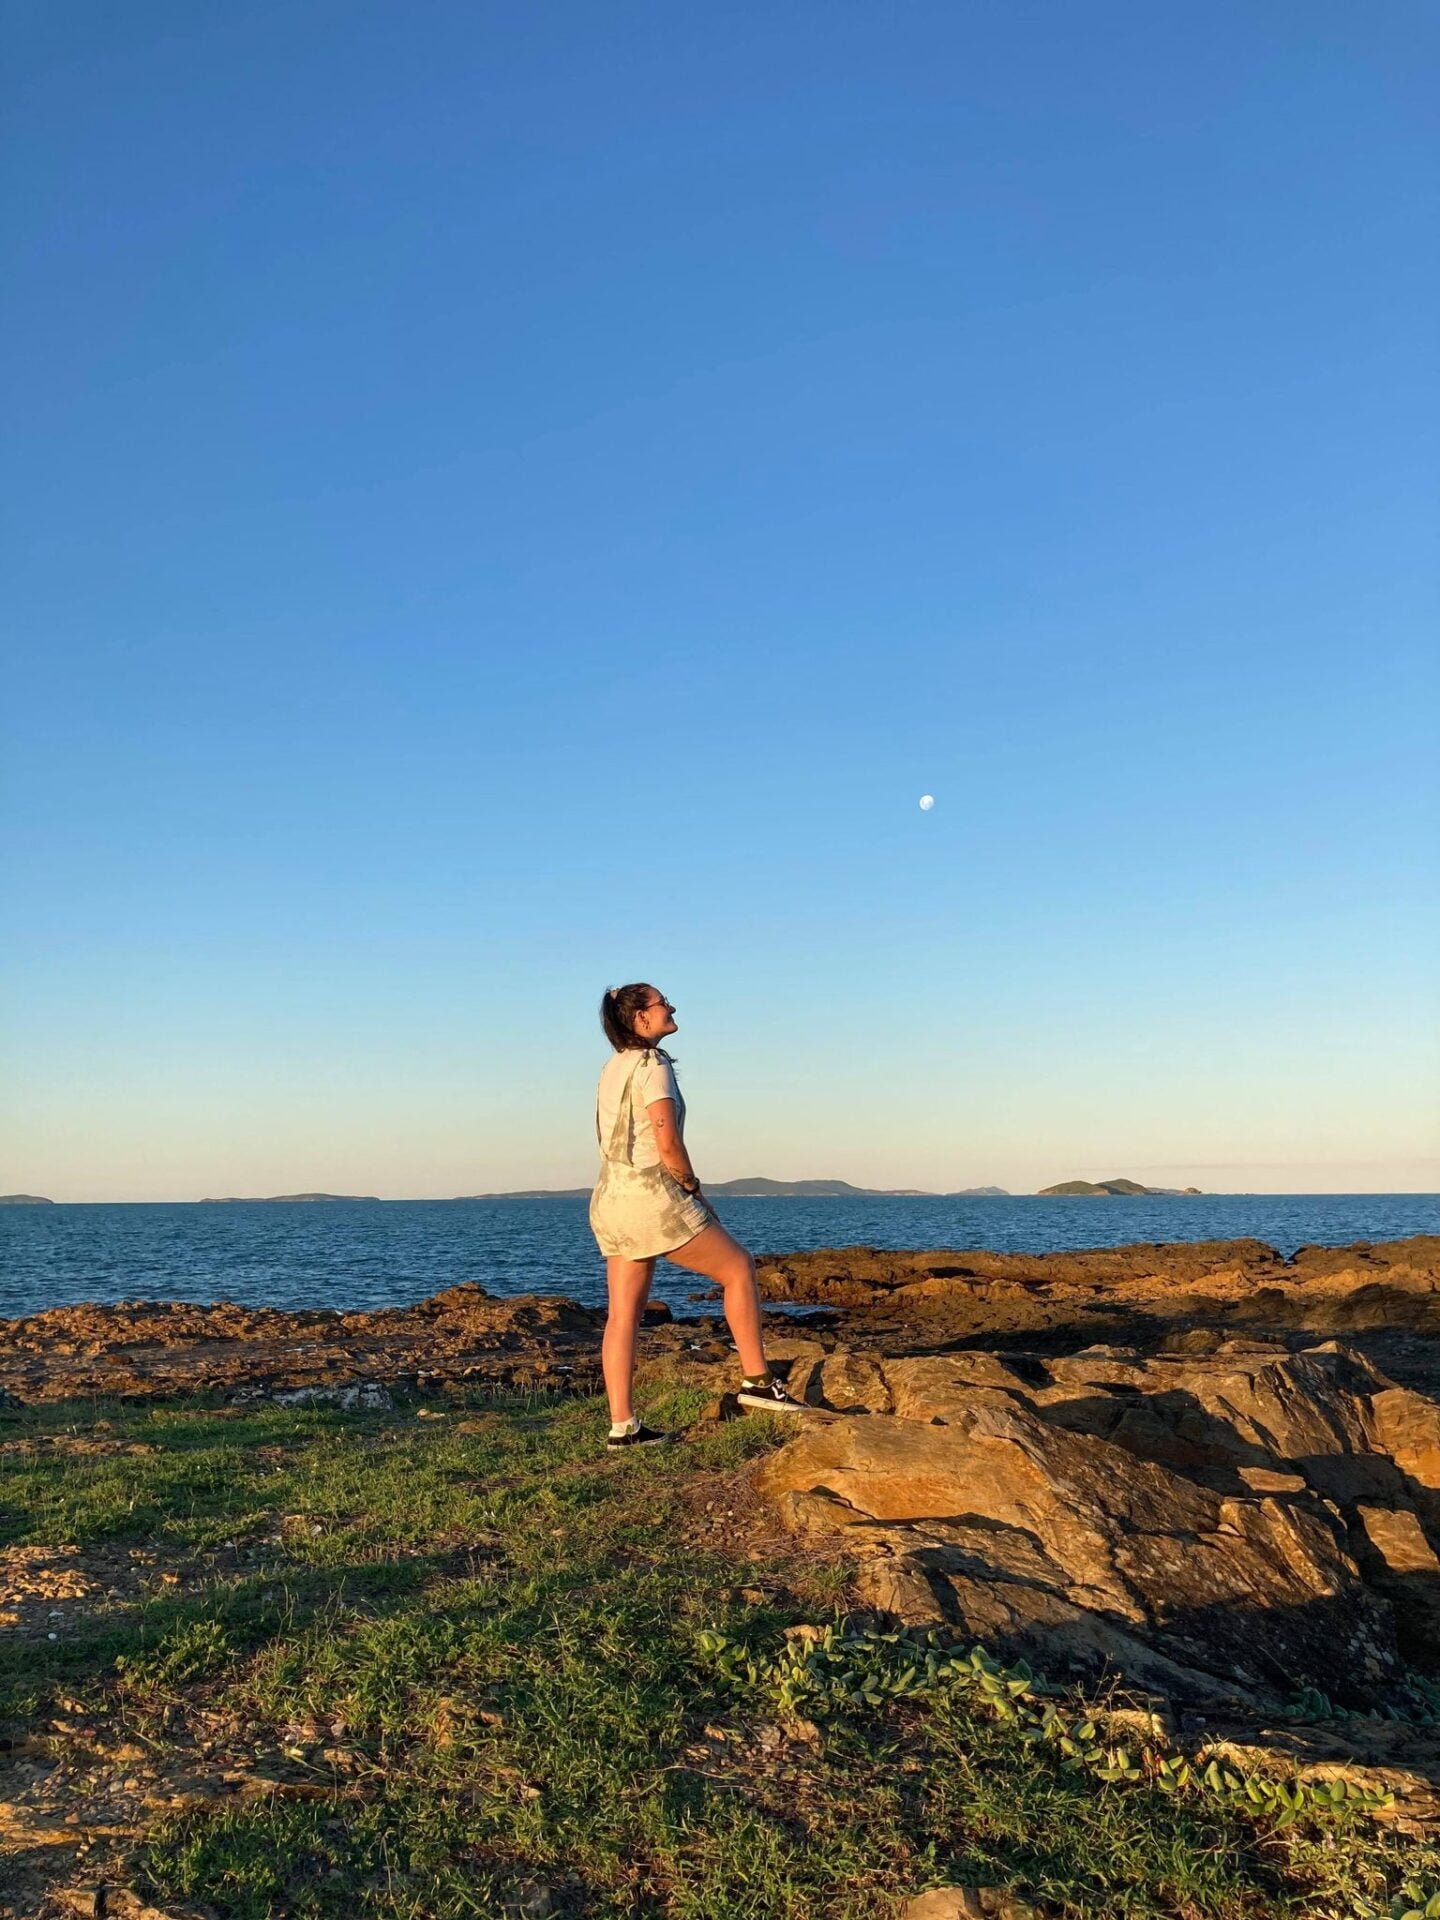 Great Keppel island in Yeppoon being explored while travelling the vanlife journey down the east coast of australia as a solo female traveller